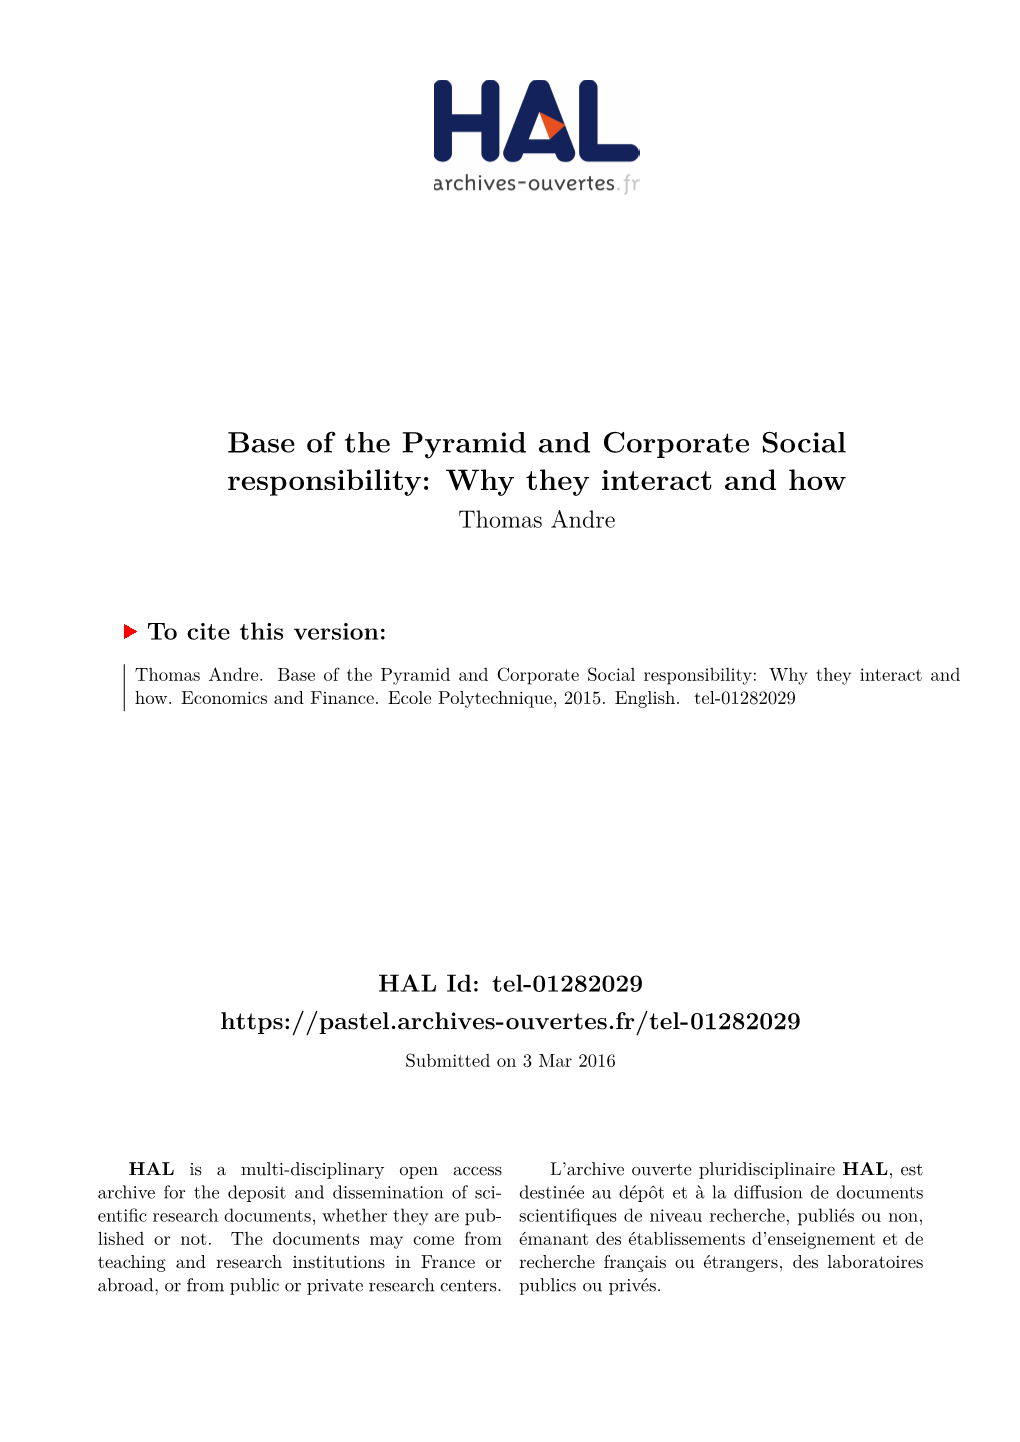 Base of the Pyramid and Corporate Social Responsibility: Why They Interact and How Thomas Andre